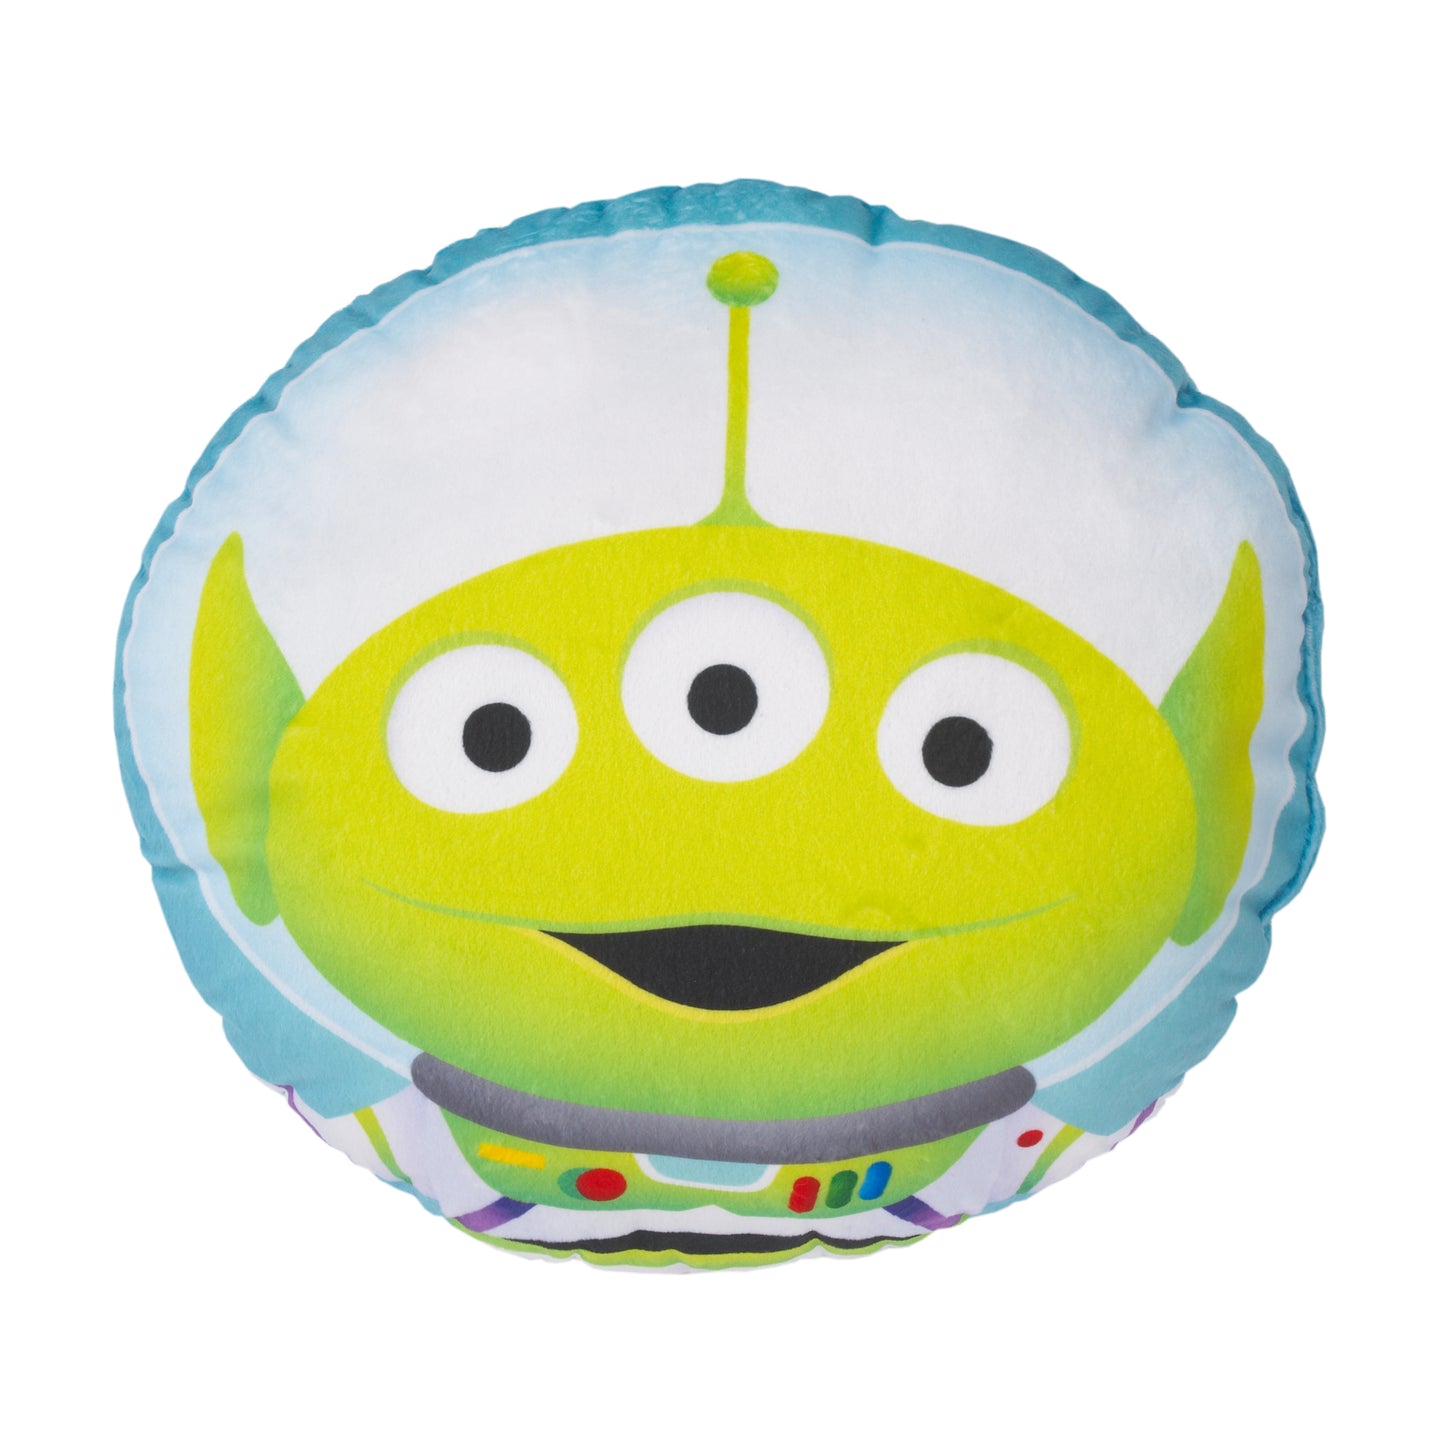 Disney Toy Story 4 Alien Aqua, Green and White Decorative Shaped Pillow